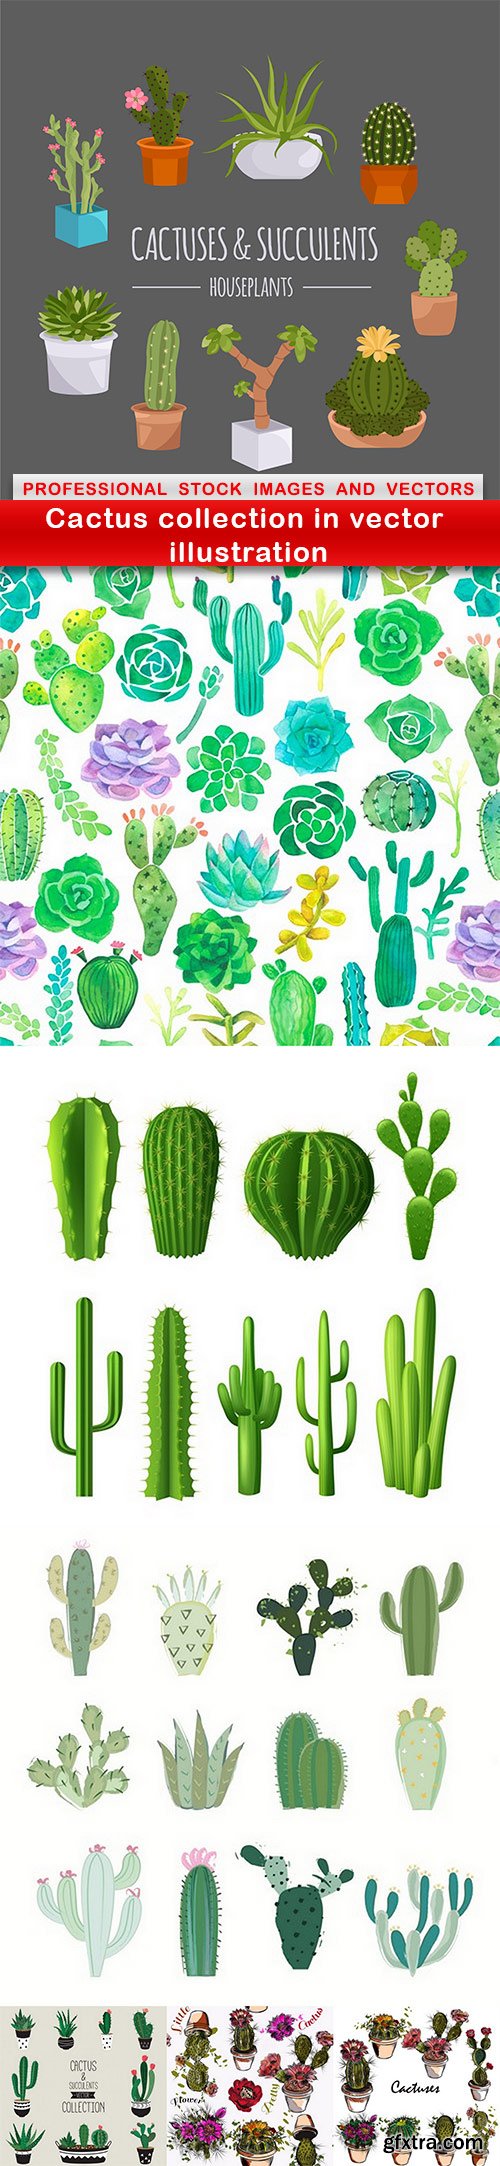 Cactus collection in vector illustration - 7 EPS